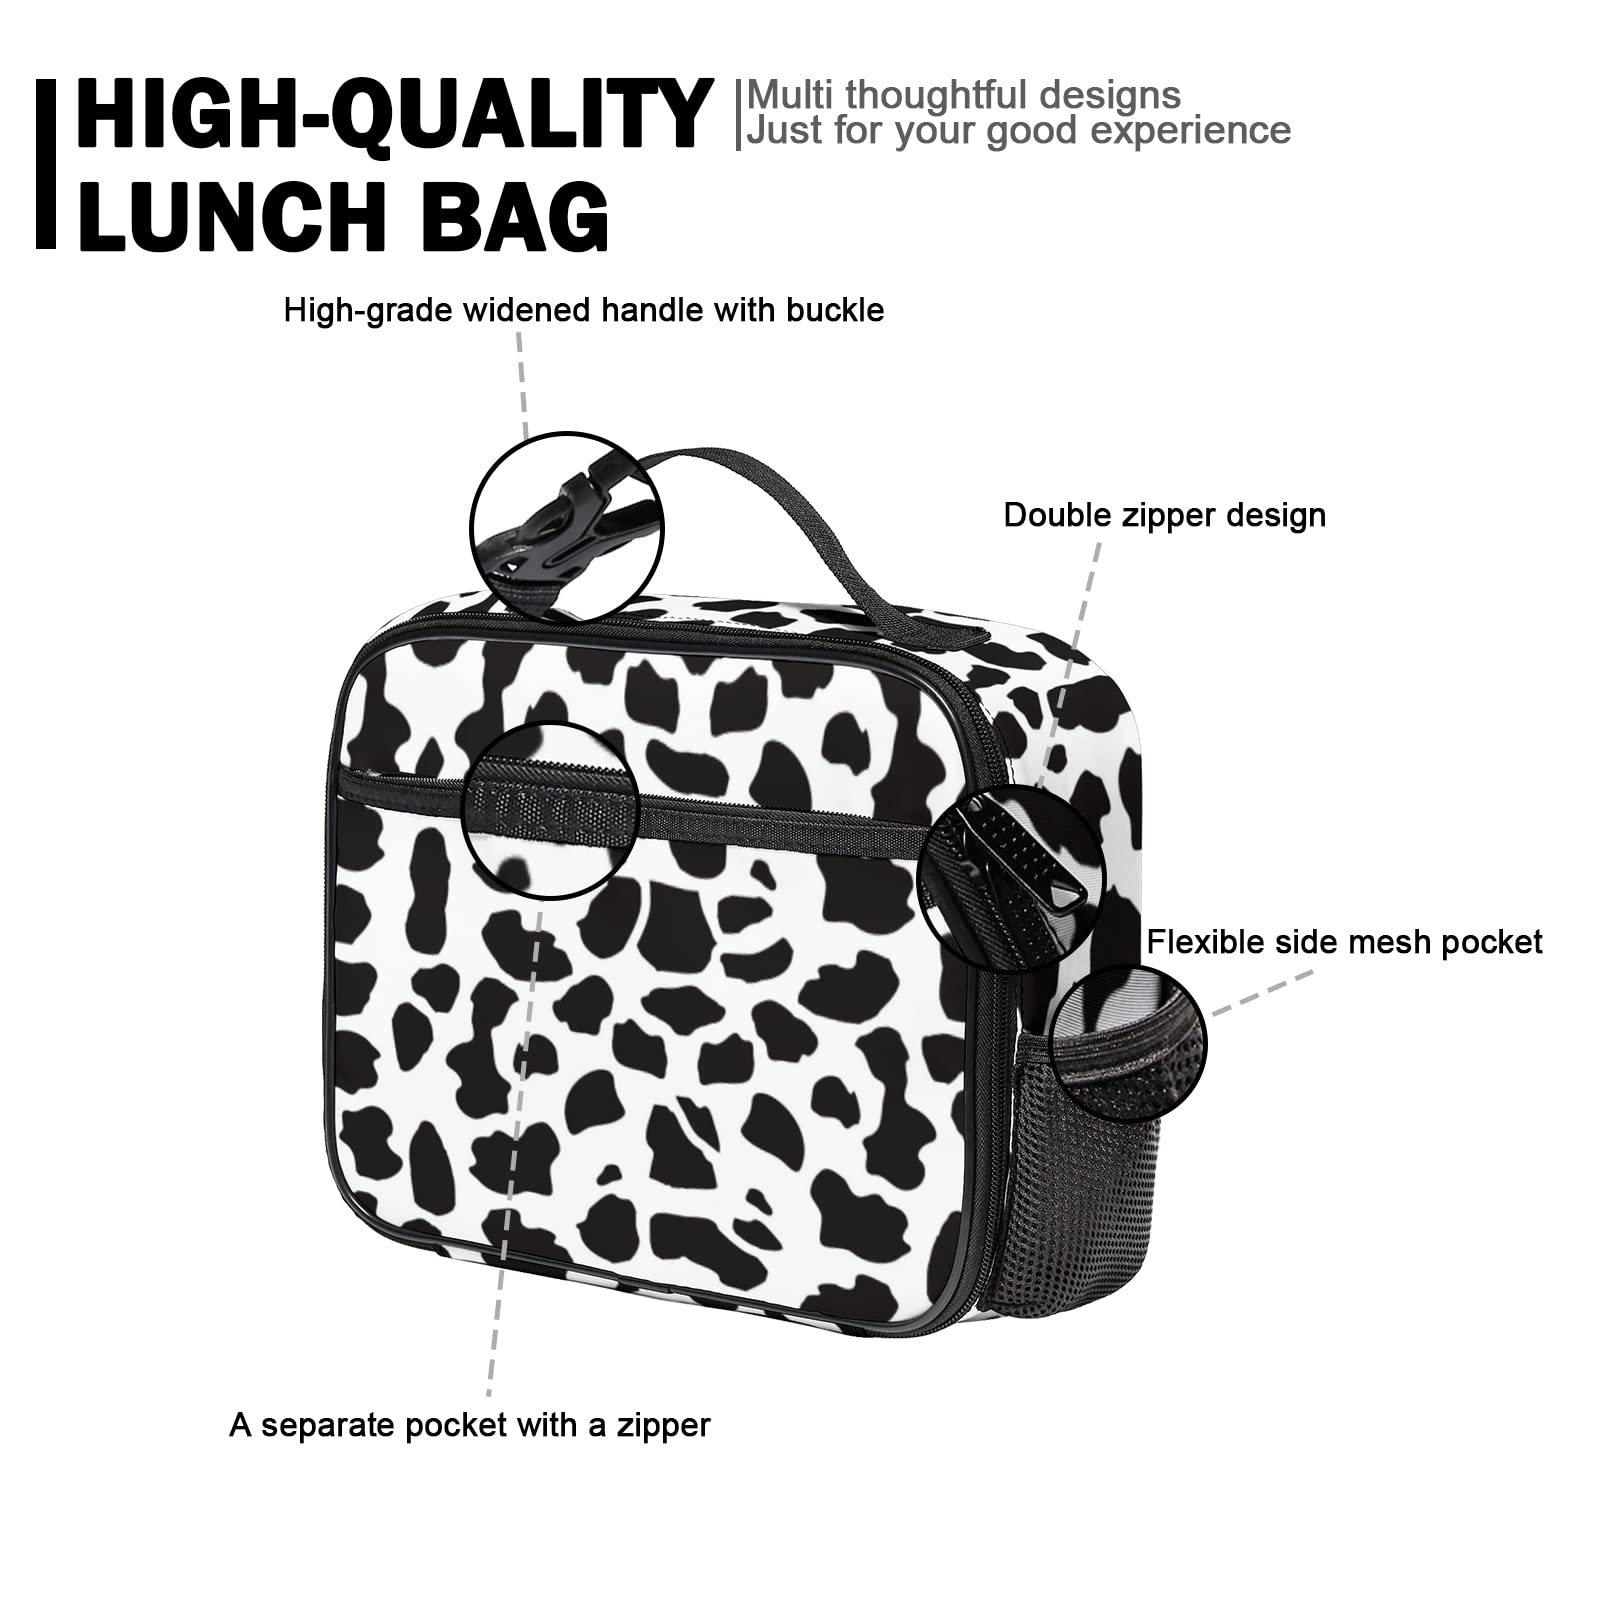 Cow Print Lunch Bag with Pockets Durable Insulation Lunch Box Leakproof Lunch Tote Bag For Teen Women Men Work Travel